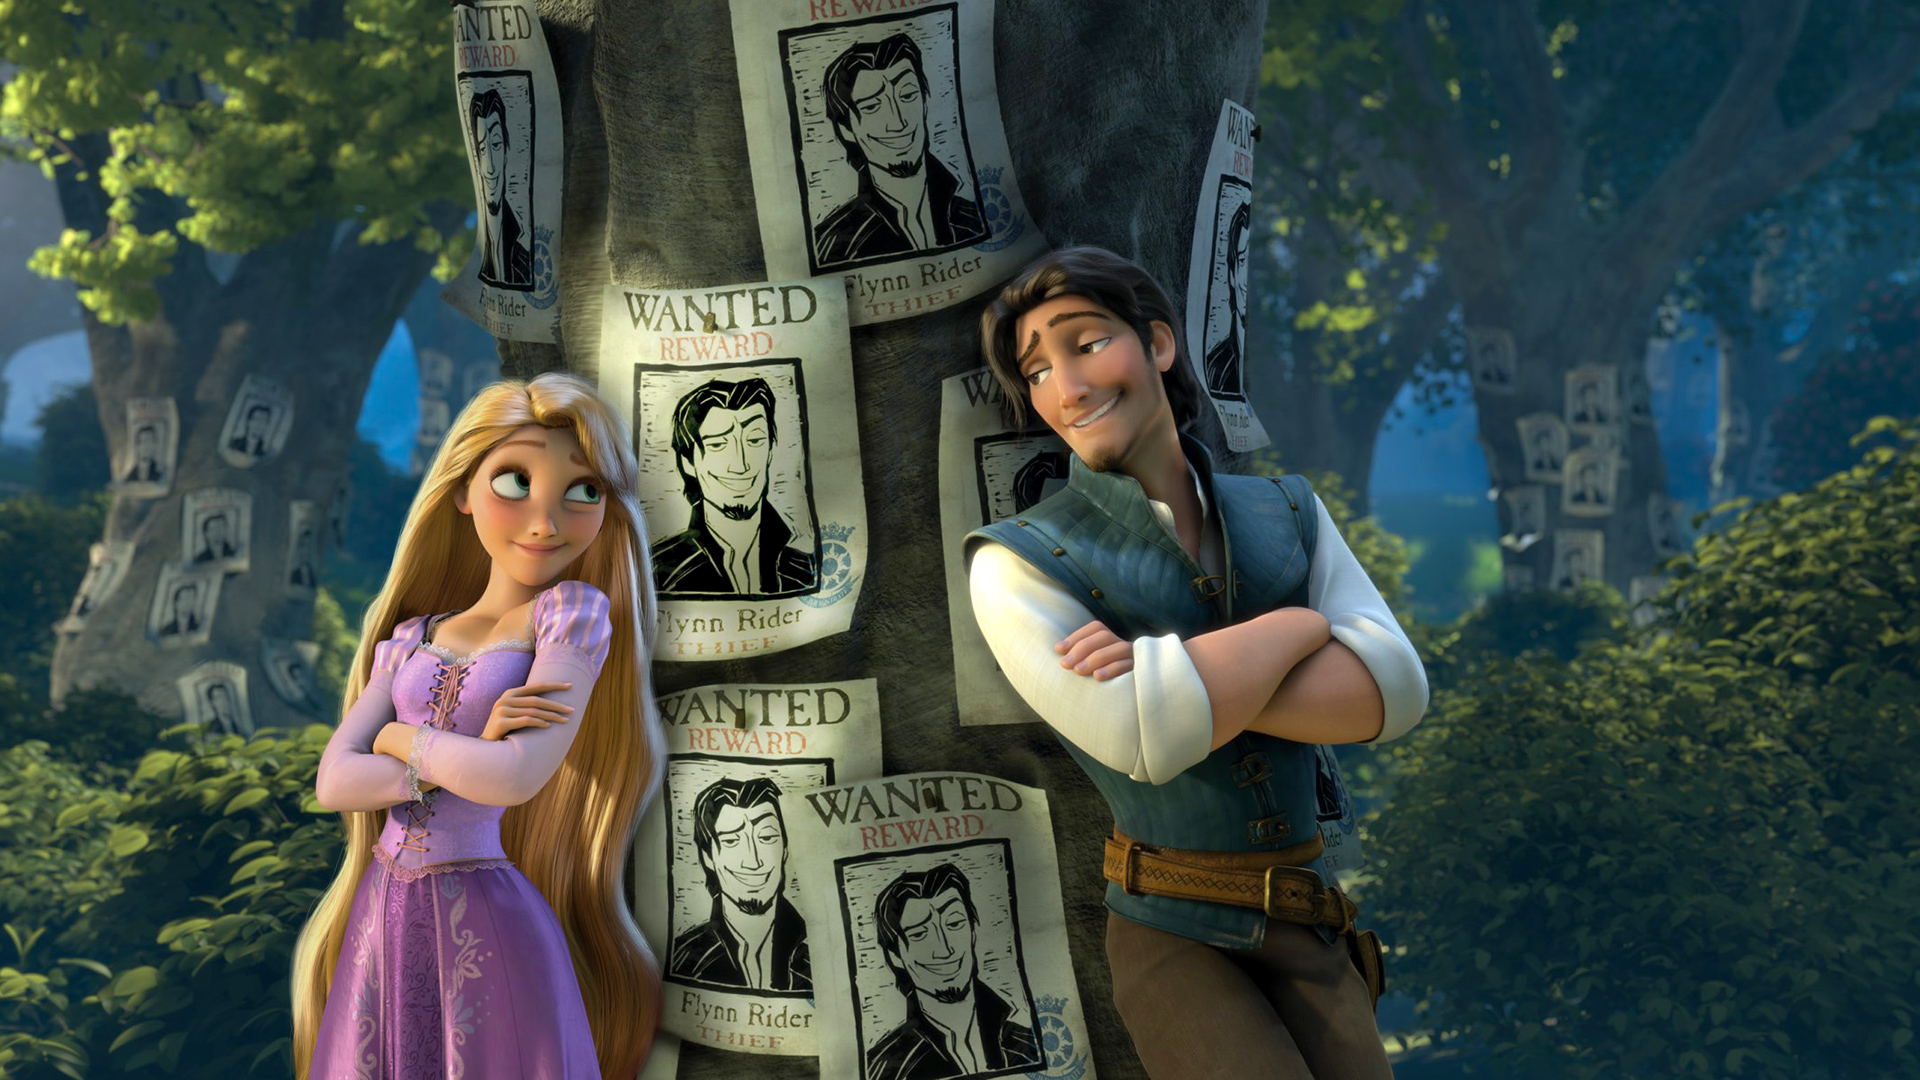 Movie Tangled HD Wallpaper | Background Image